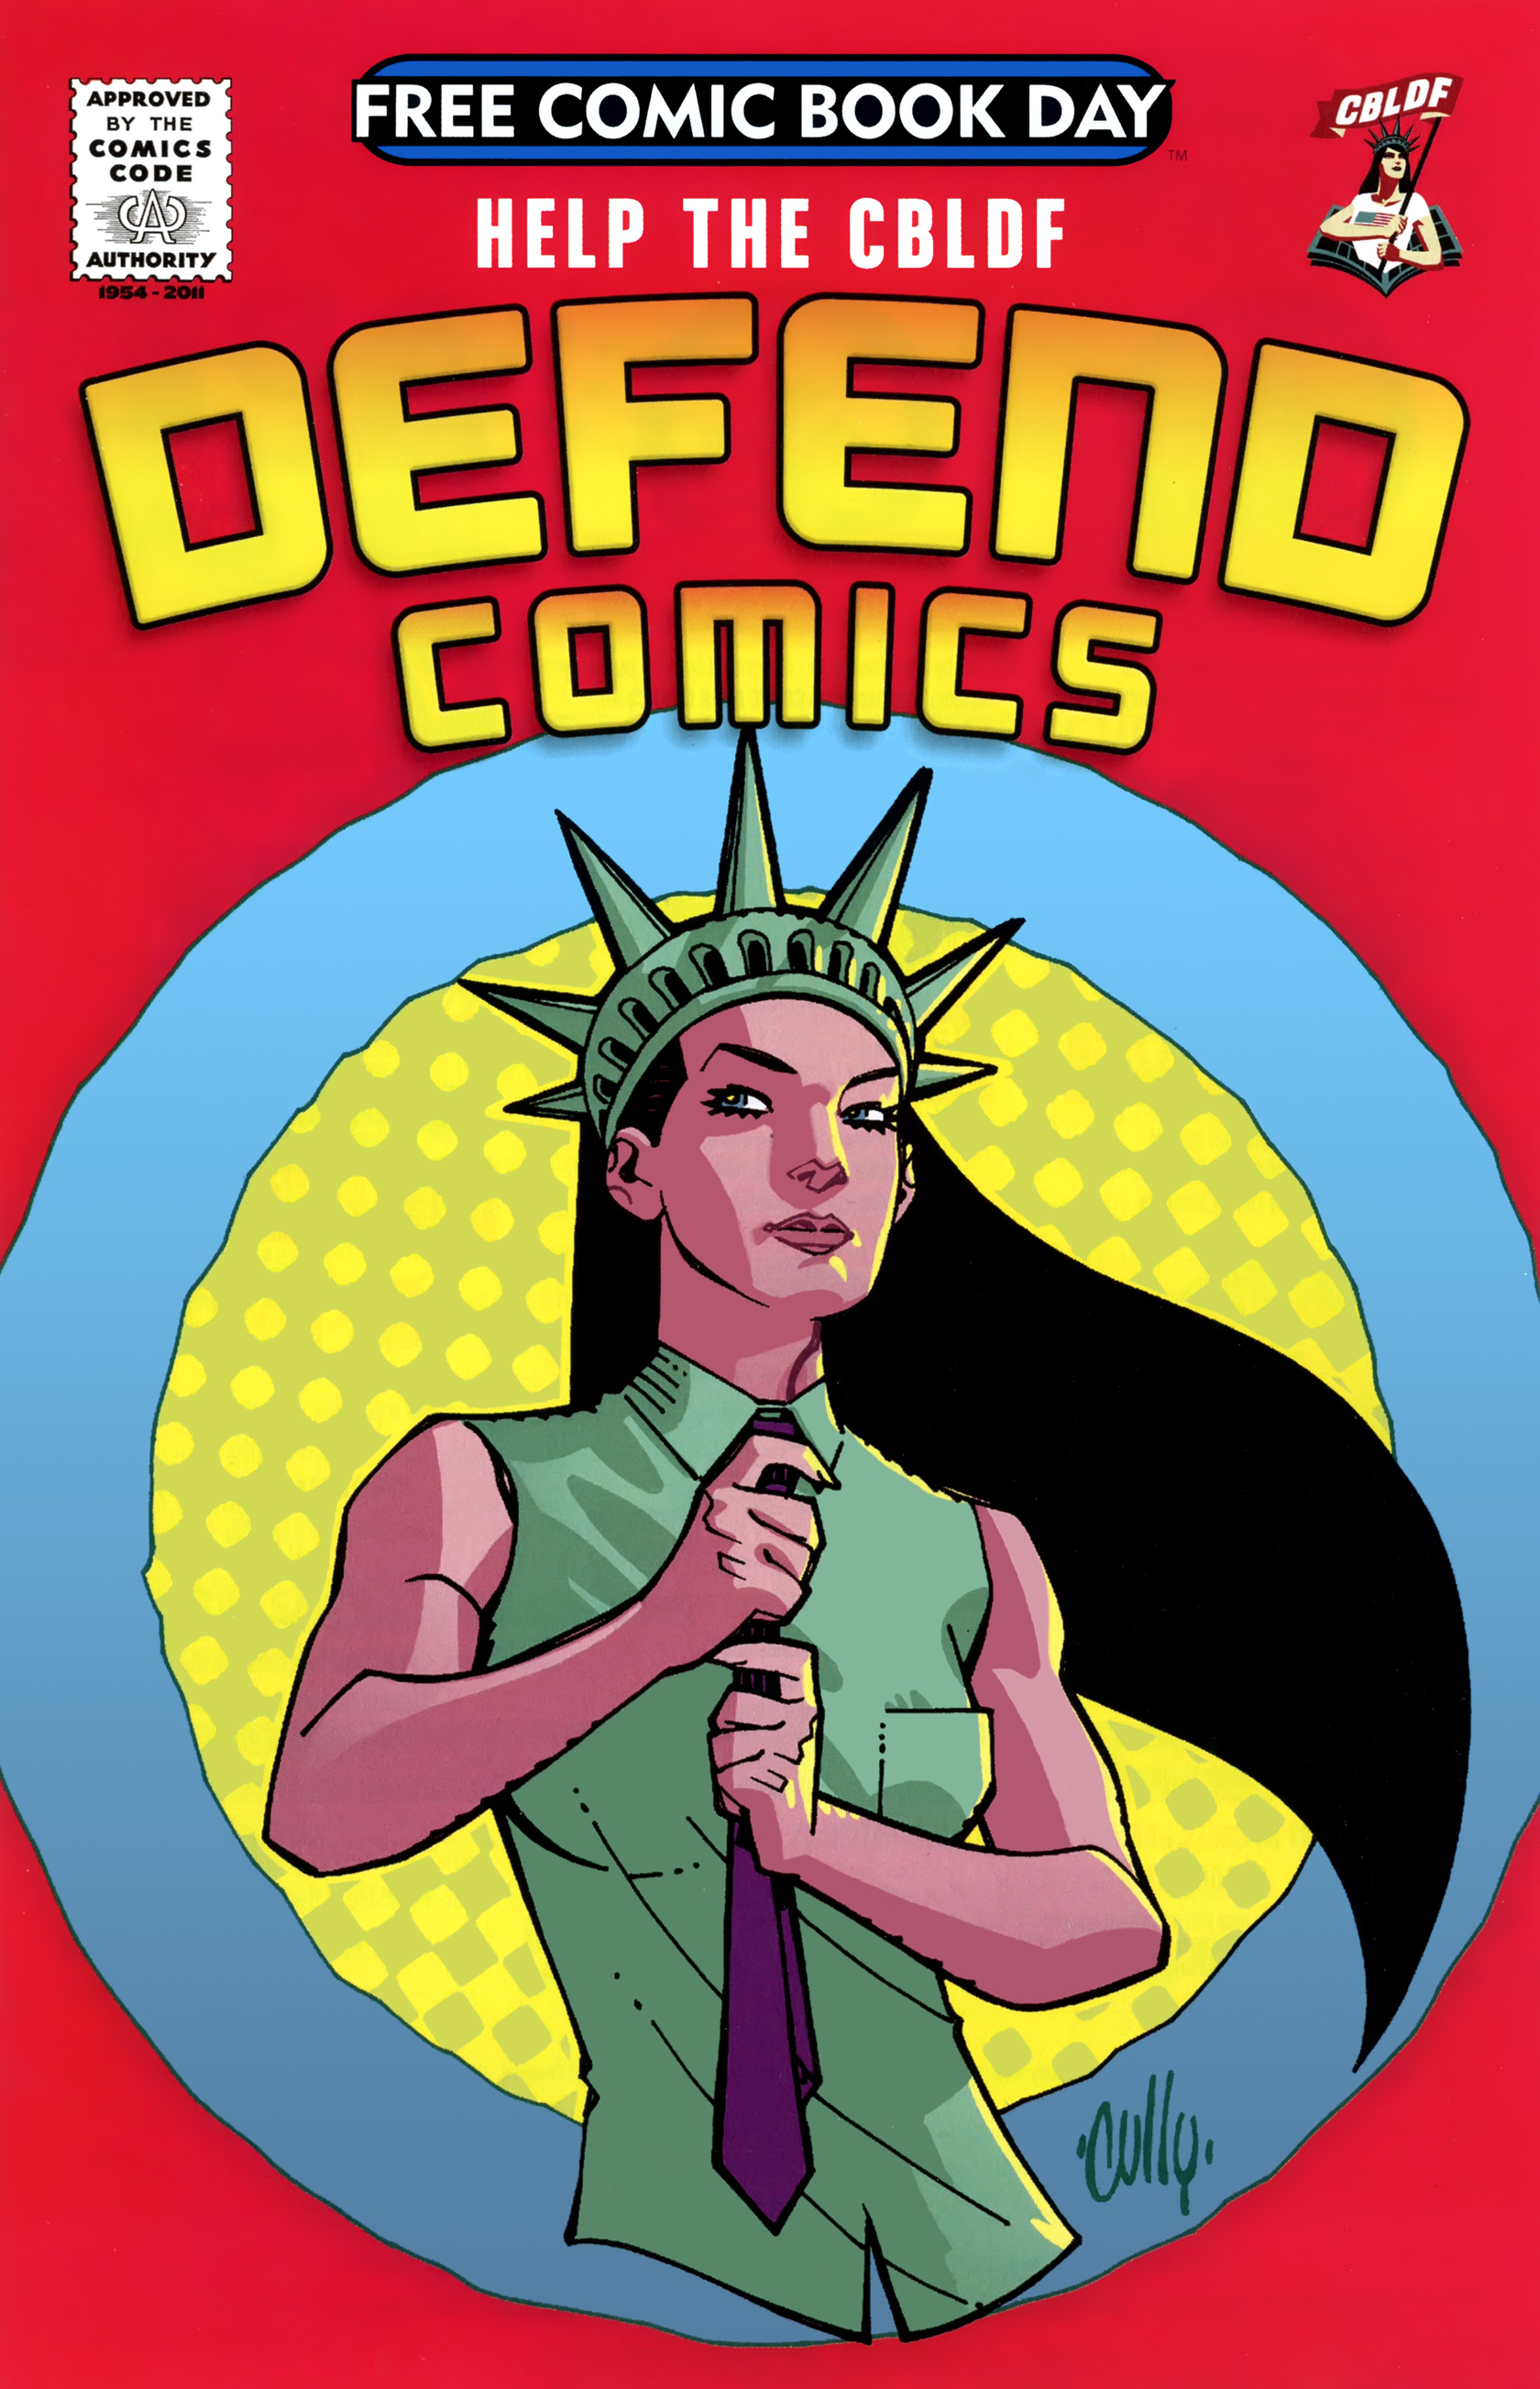 Read online Free Comic Book Day 2014 comic -  Issue # Defend Comics - 1